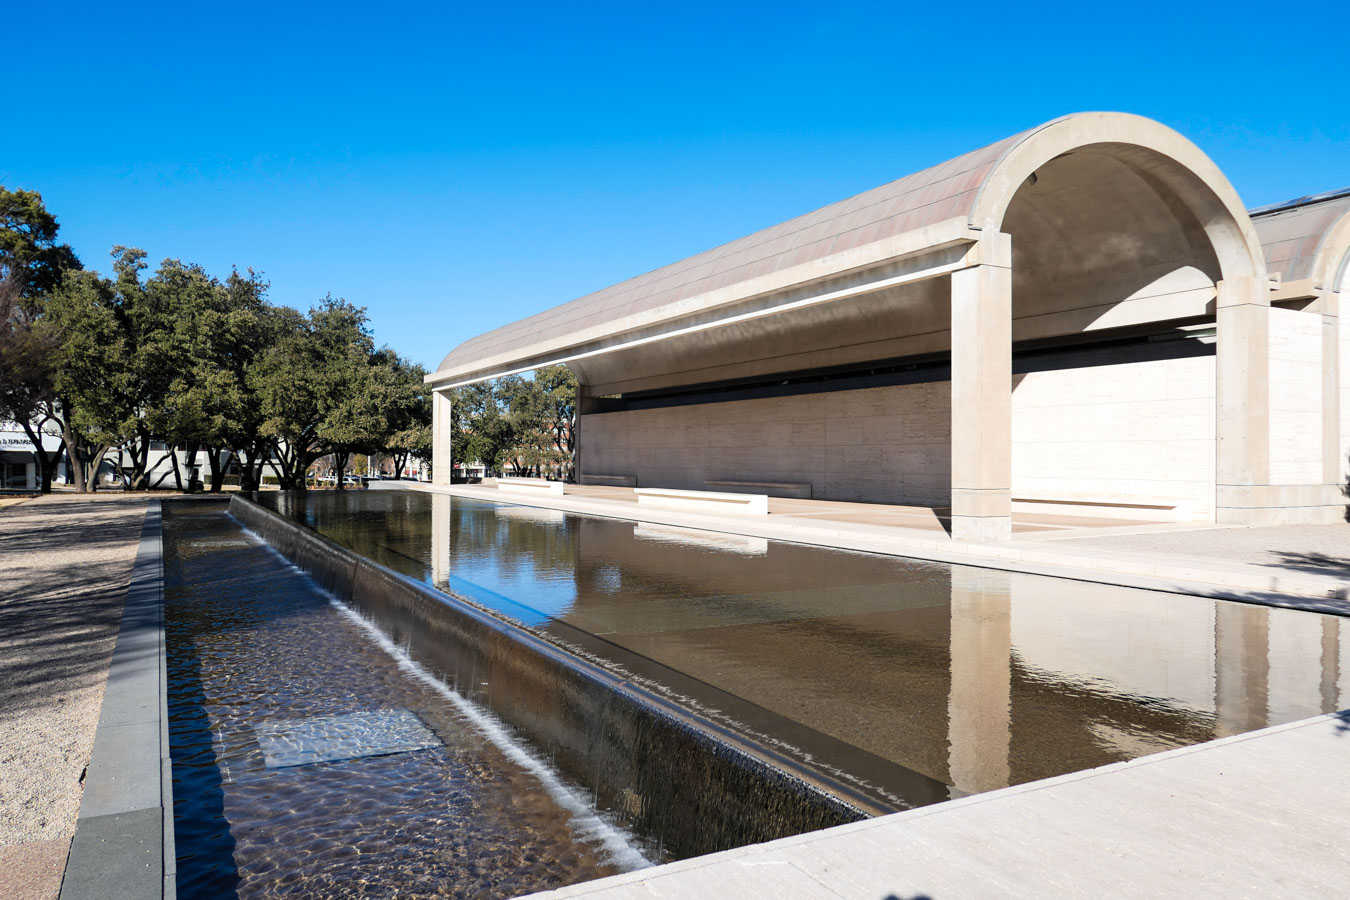 What to Do in Ft. Worth for 1 Day Travel Guide - Where to Eat - Kimbell Museum